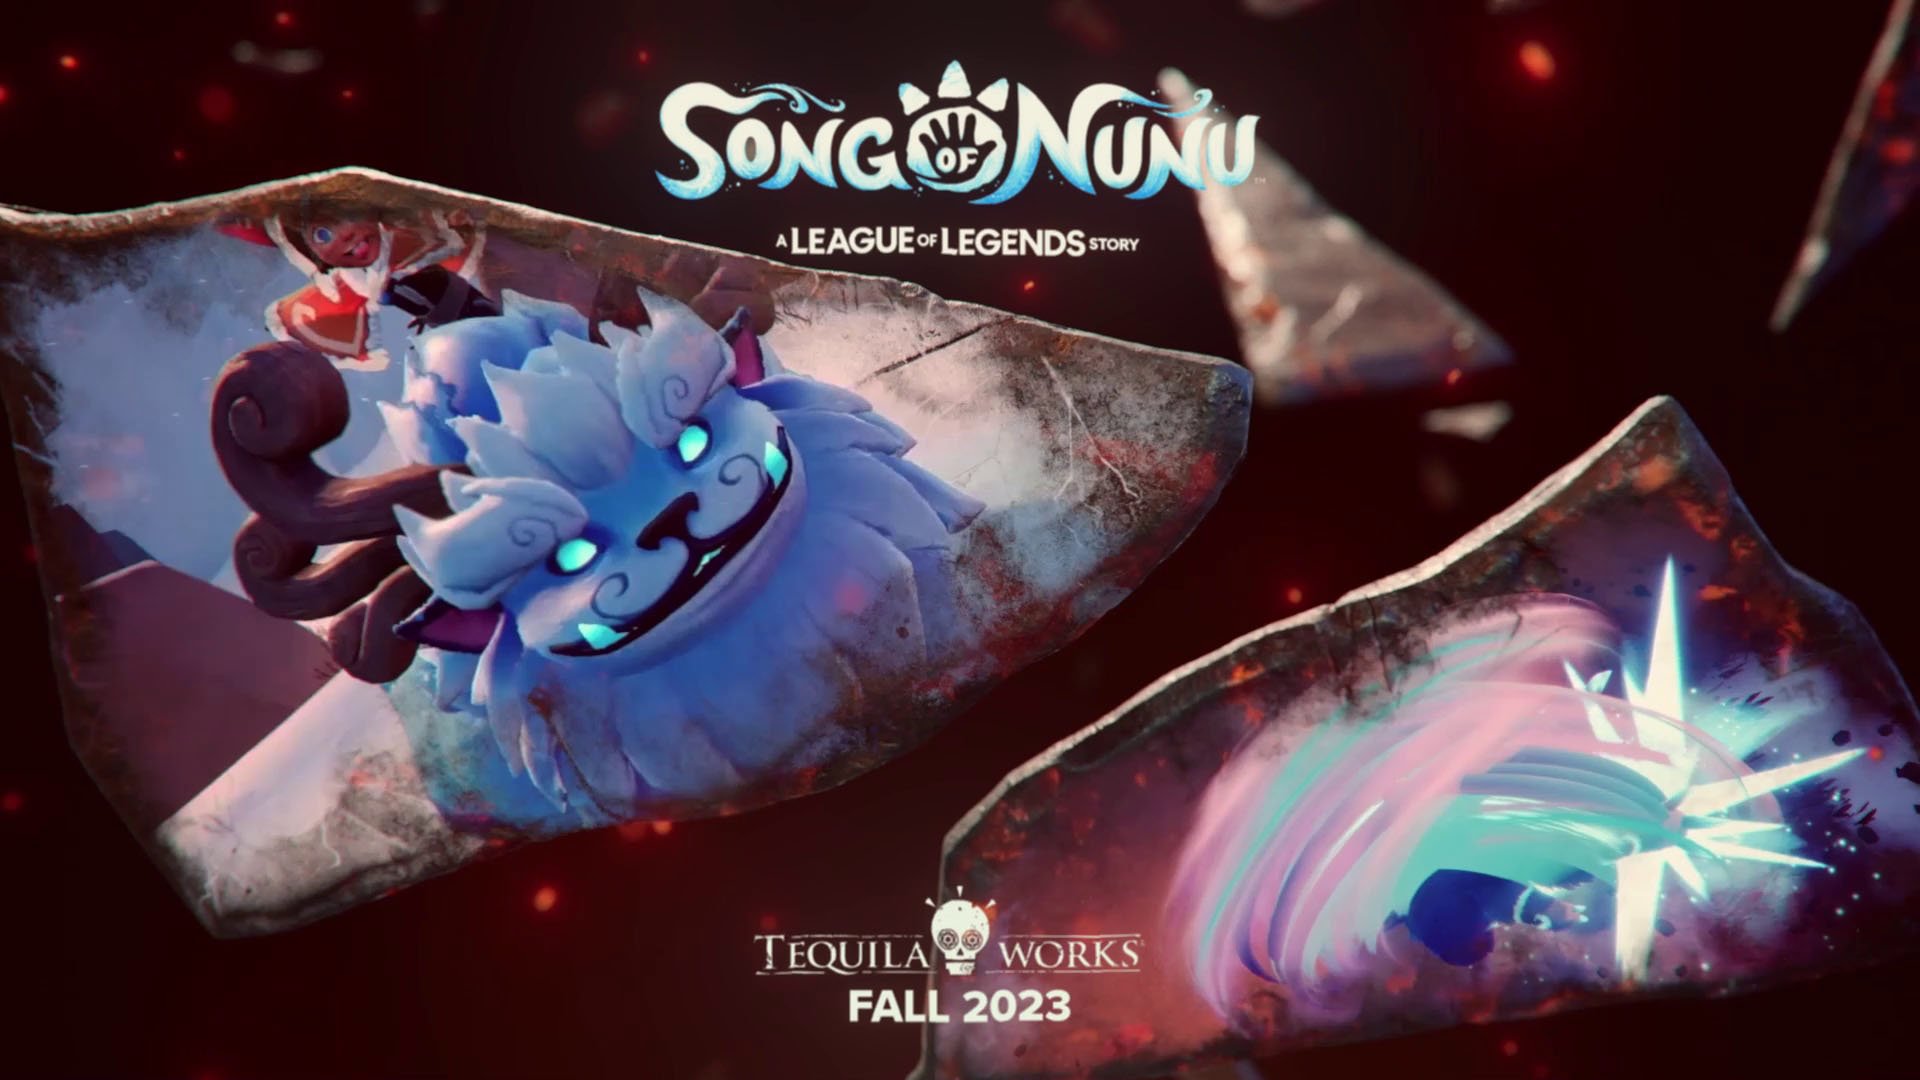 # Song of Nunu: A League of Legends Story launches this fall